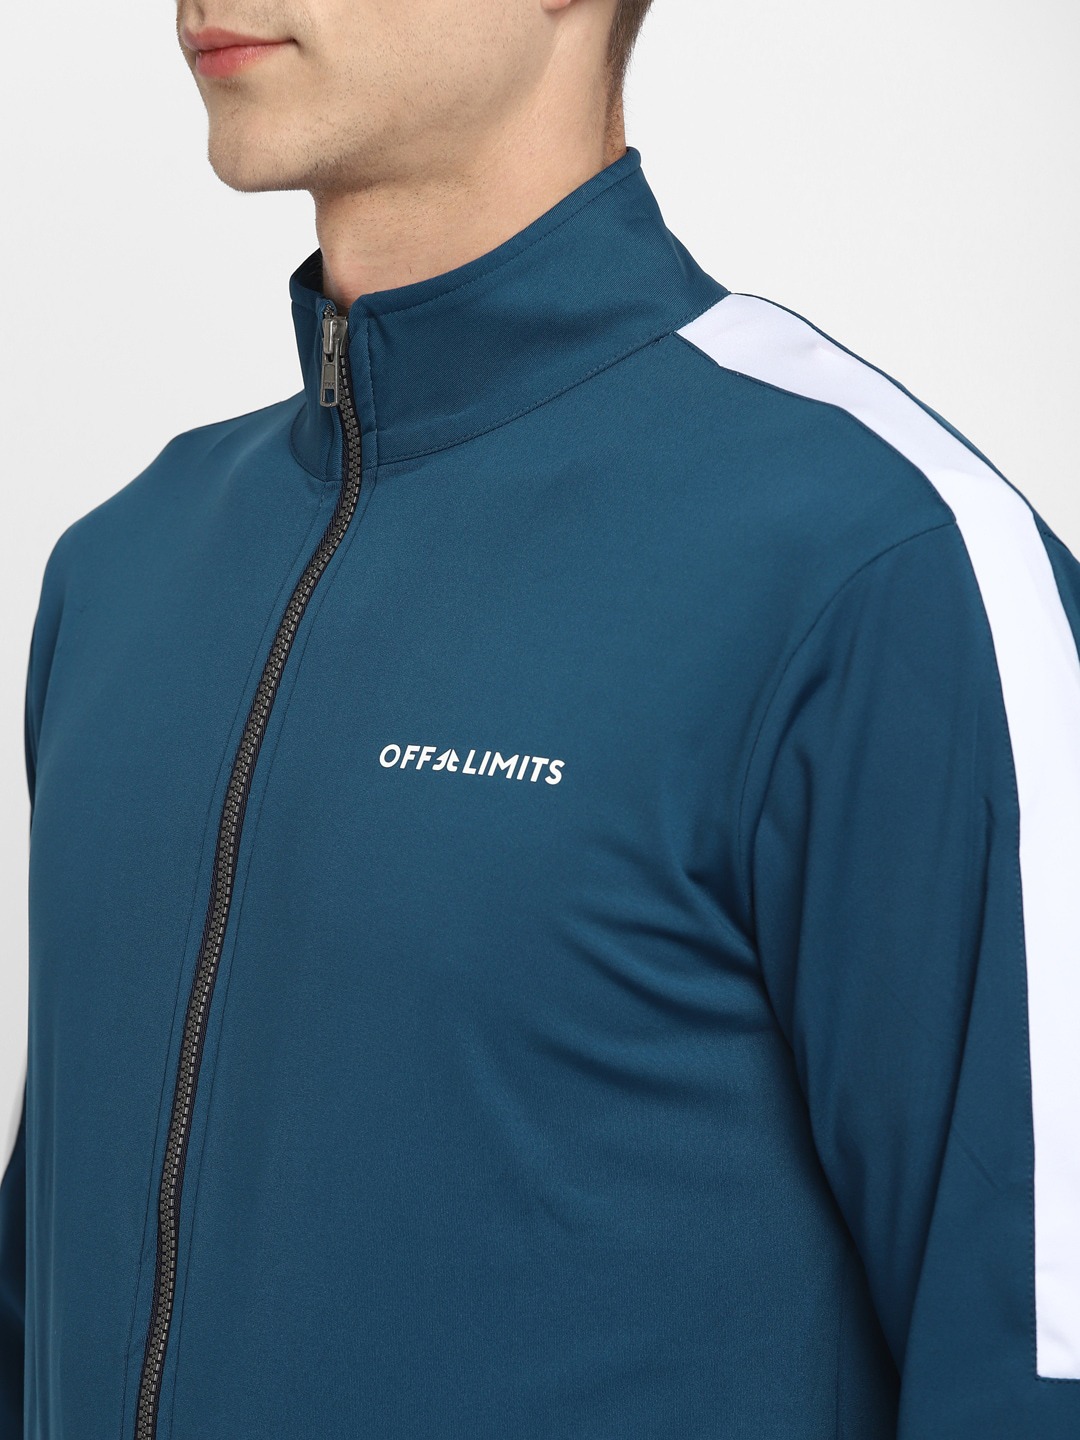 Clothing Tracksuits | OFF LIMITS Men Teal Blue Solid Tracksuit - IT35557